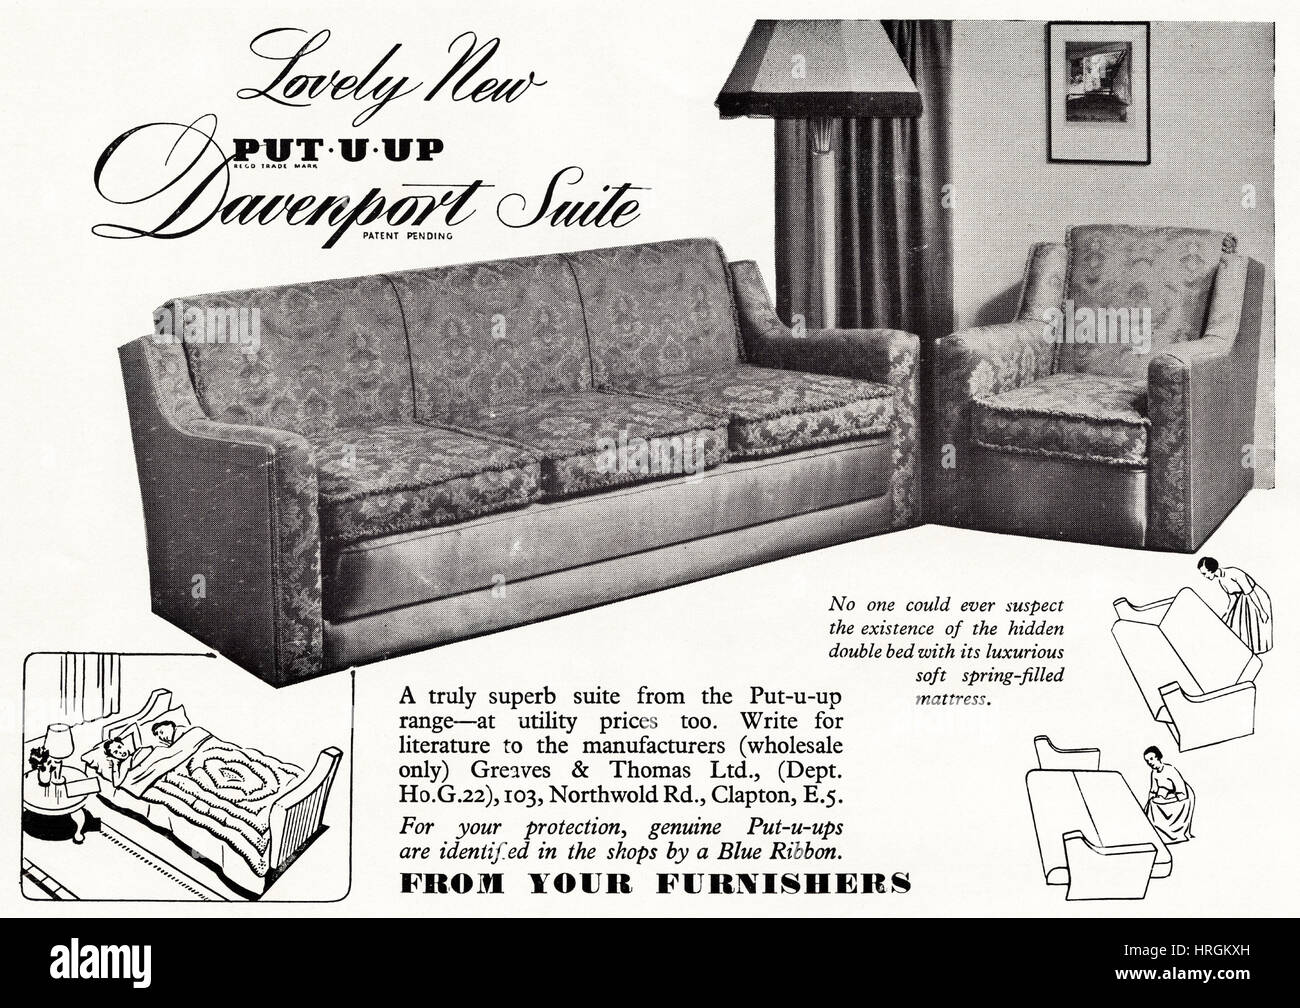 1950s advertising advert from original old vintage English magazine dated  1950 advertisement for Davenport Suite sofa bed Stock Photo - Alamy